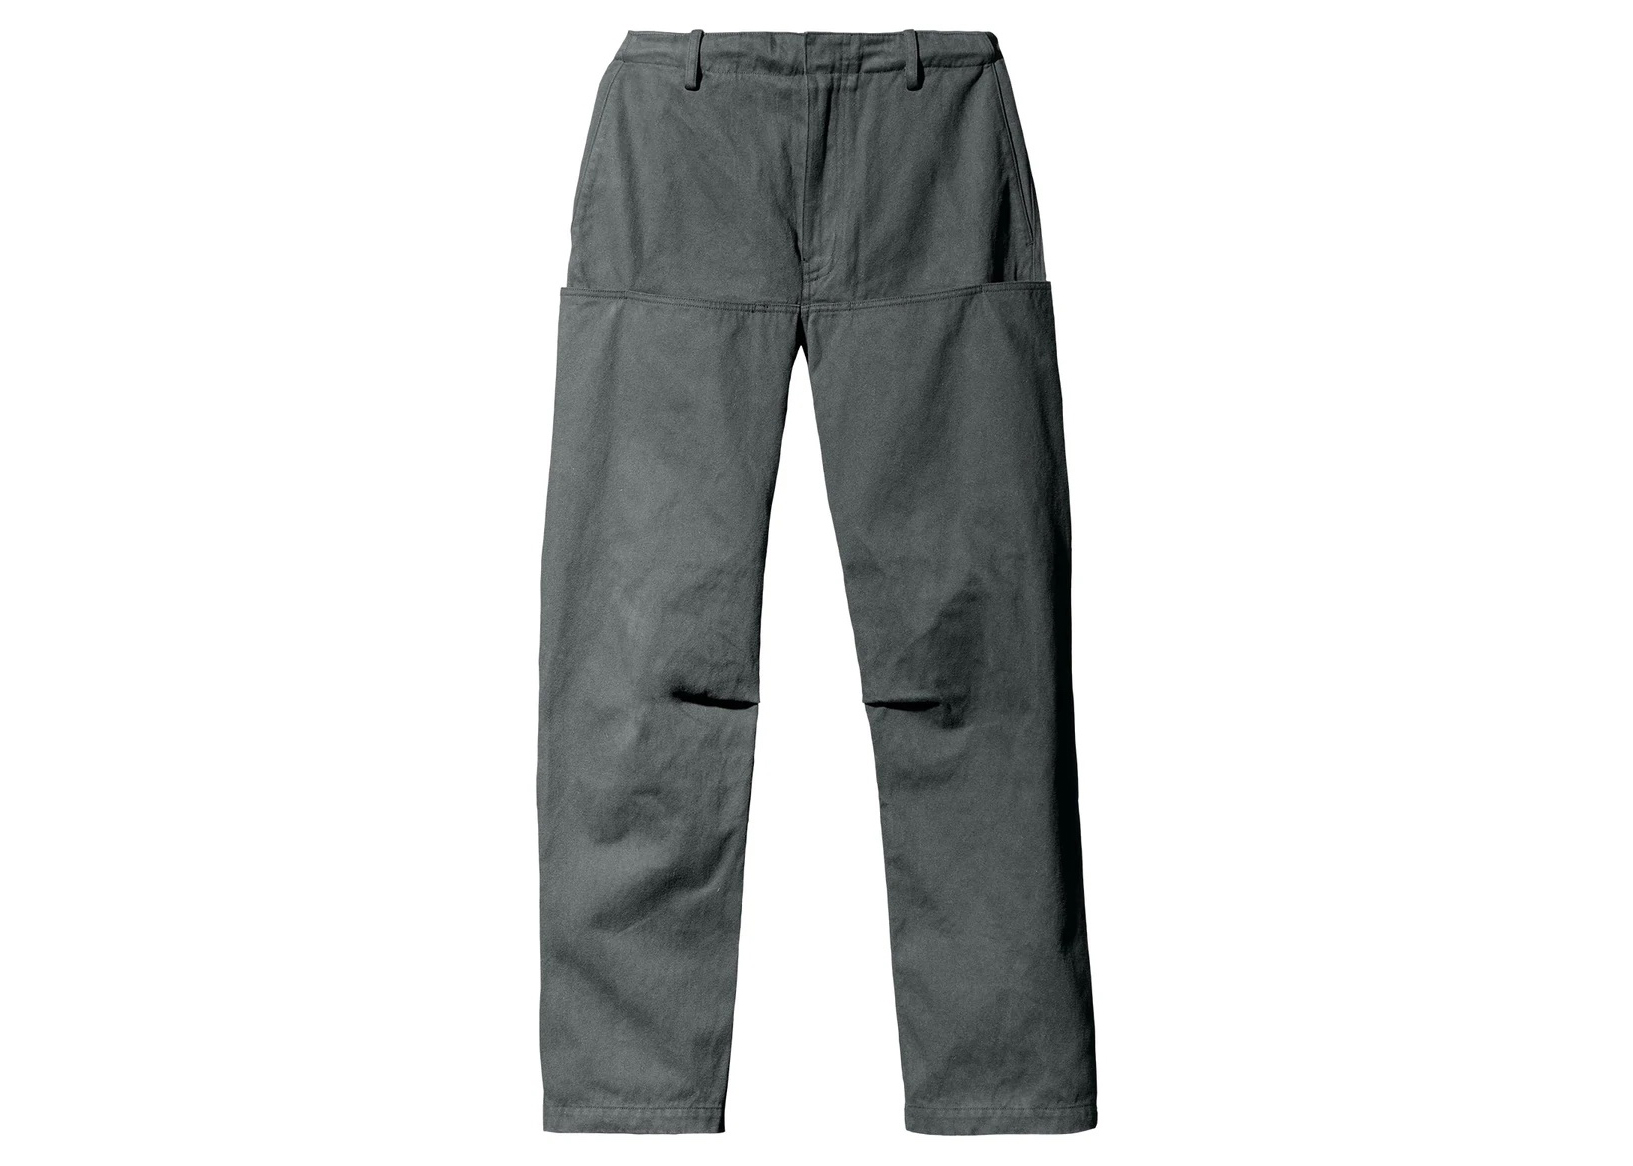 Men's Beige Straight Fit Trousers – Levis India Store